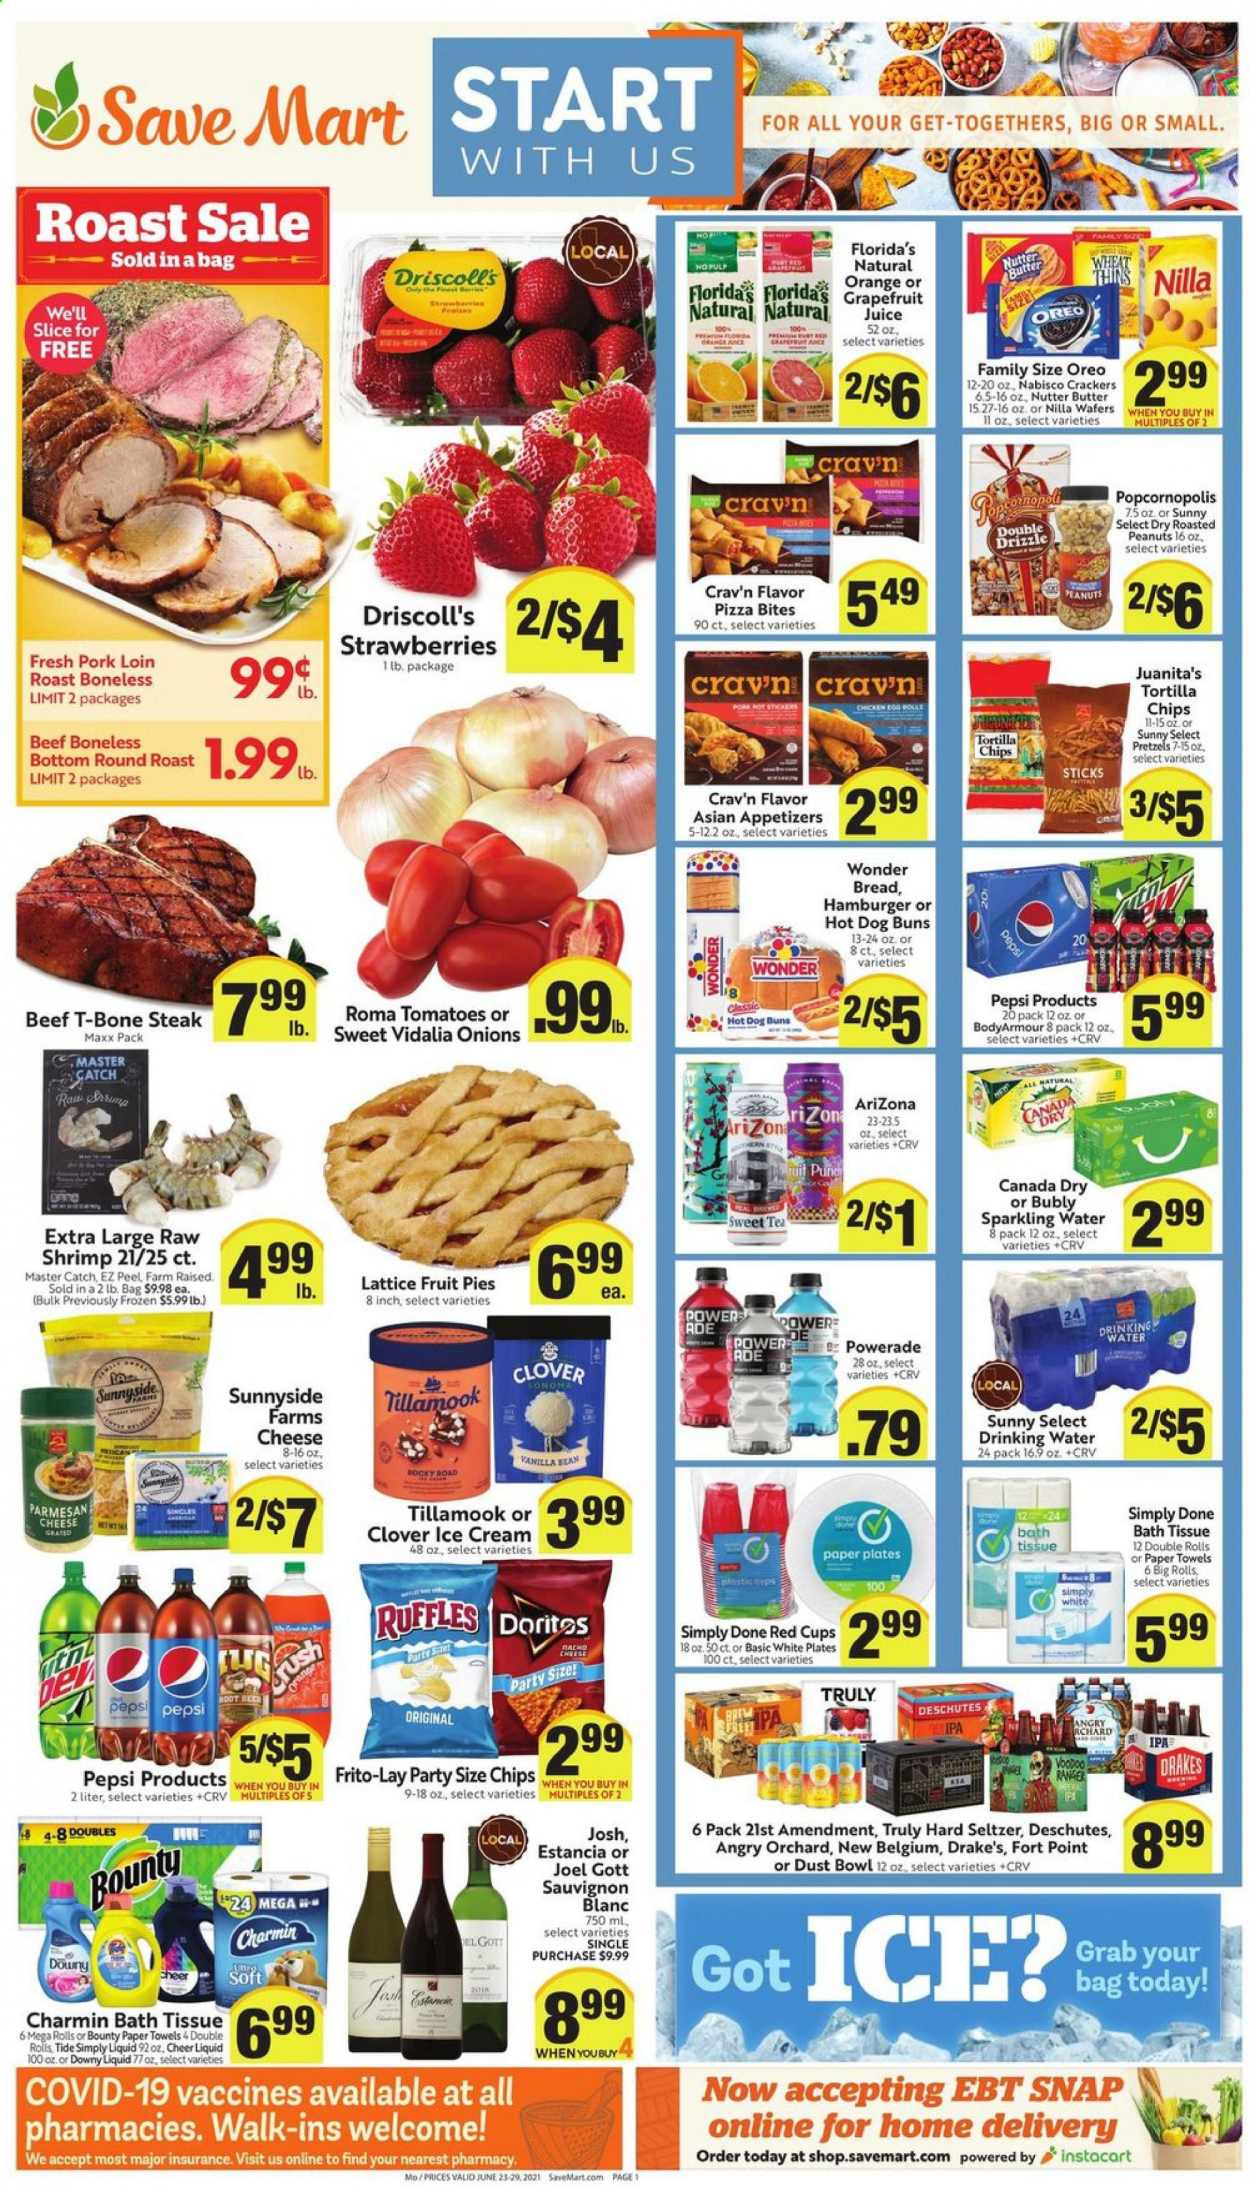 thumbnail - Save Mart Flyer - 06/23/2021 - 06/29/2021 - Sales products - pretzels, buns, tomatoes, onion, grapefruits, strawberries, oranges, beef meat, t-bone steak, steak, round roast, pork loin, pork meat, shrimps, pizza, parmesan, Oreo, Clover, butter, ice cream, wafers, Bounty, crackers, Florida's Natural, tortilla chips, Frito-Lay, Ruffles, roasted peanuts, peanuts, Canada Dry, Powerade, Pepsi, juice, AriZona, sparkling water, tea, white wine, wine, Sauvignon Blanc, Estancia, Hard Seltzer, IPA, Tide, Downy Laundry, paper plate. Page 1.